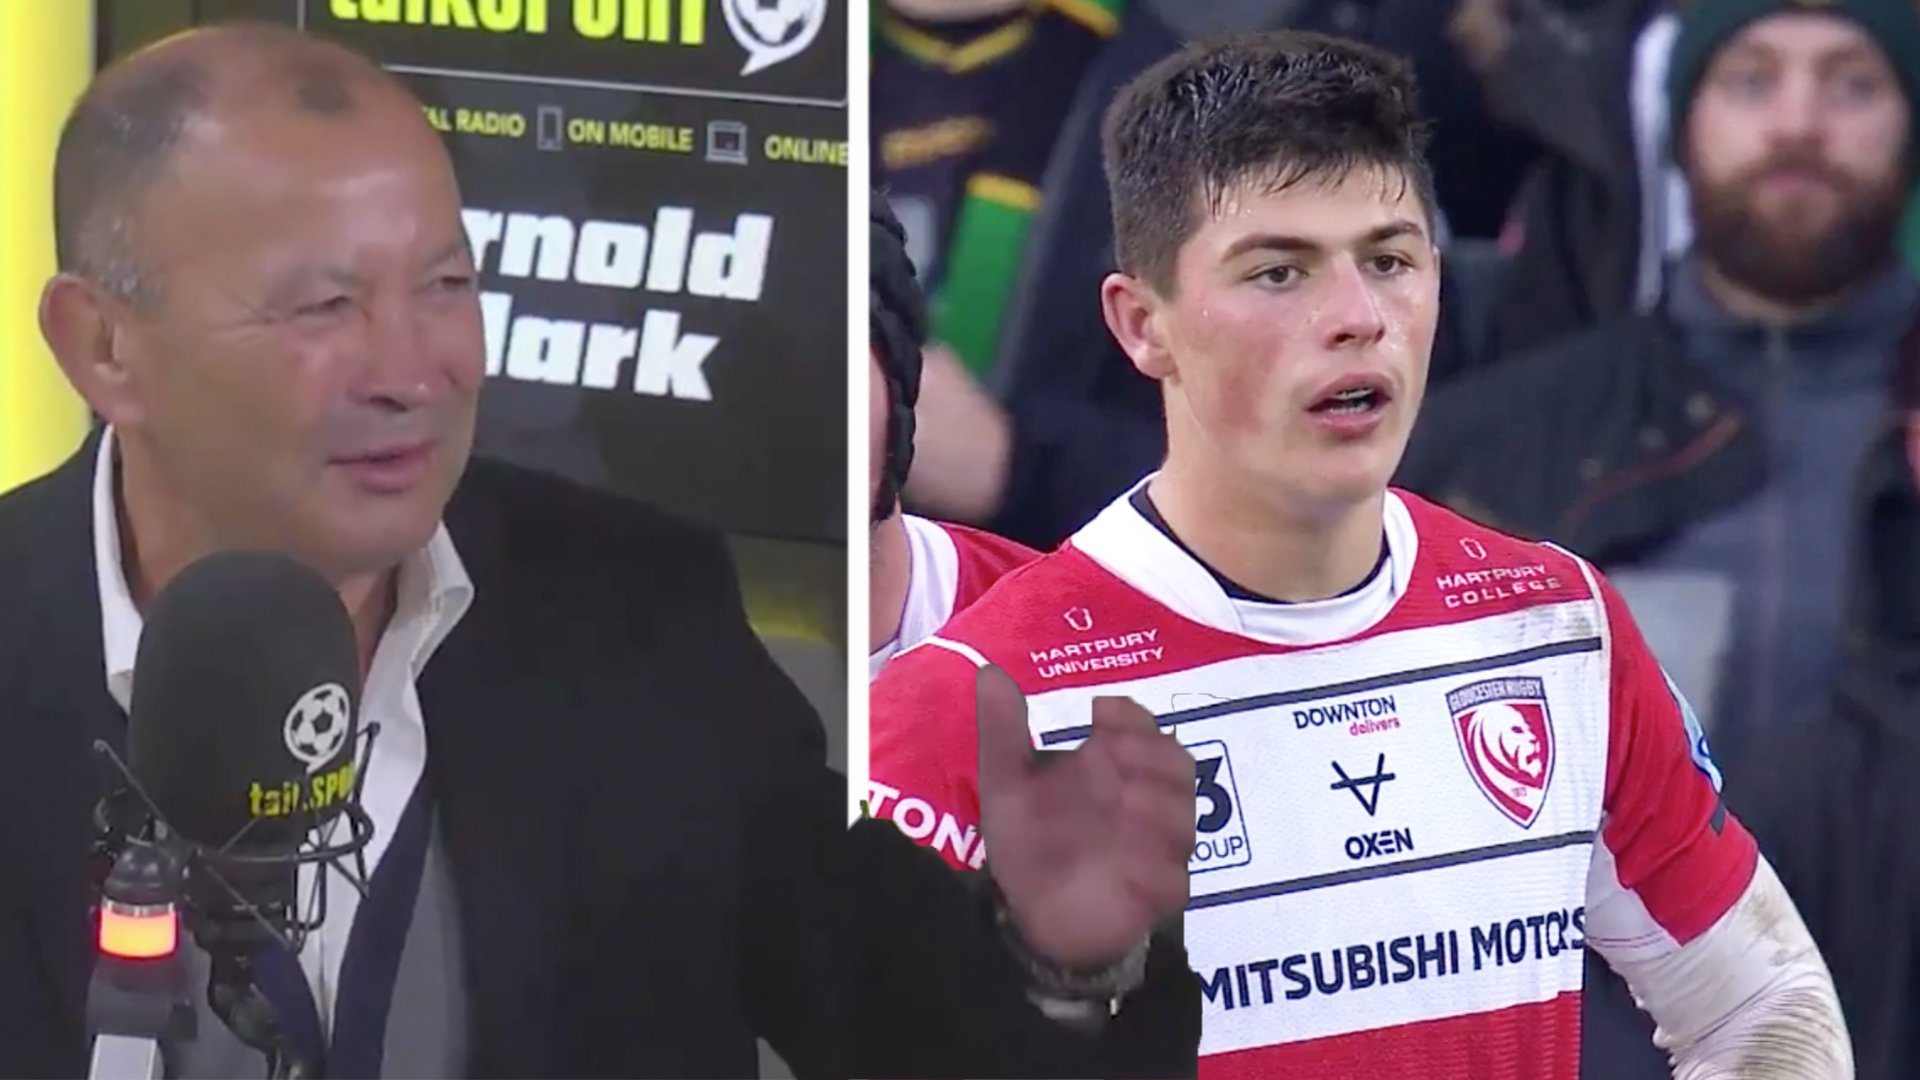 Highlight reel on teenage rugby star shows why Eddie Jones is trying to poach him from Wales